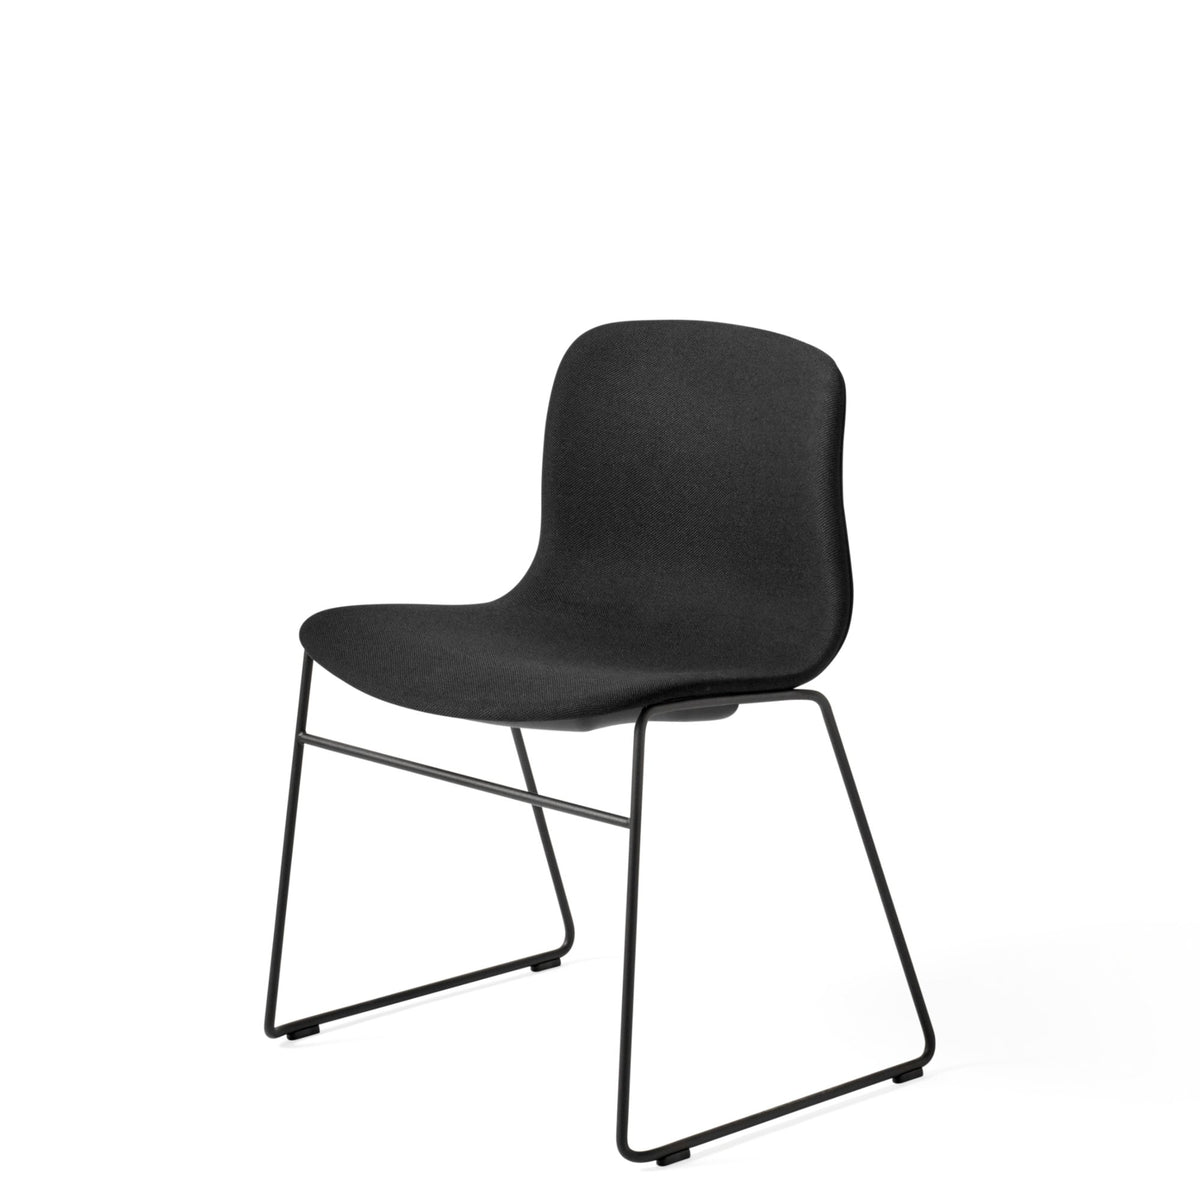 HAY About A Chair AAC 09 Steelcut 0190 Stackable Chair with Black Powder Coated Base